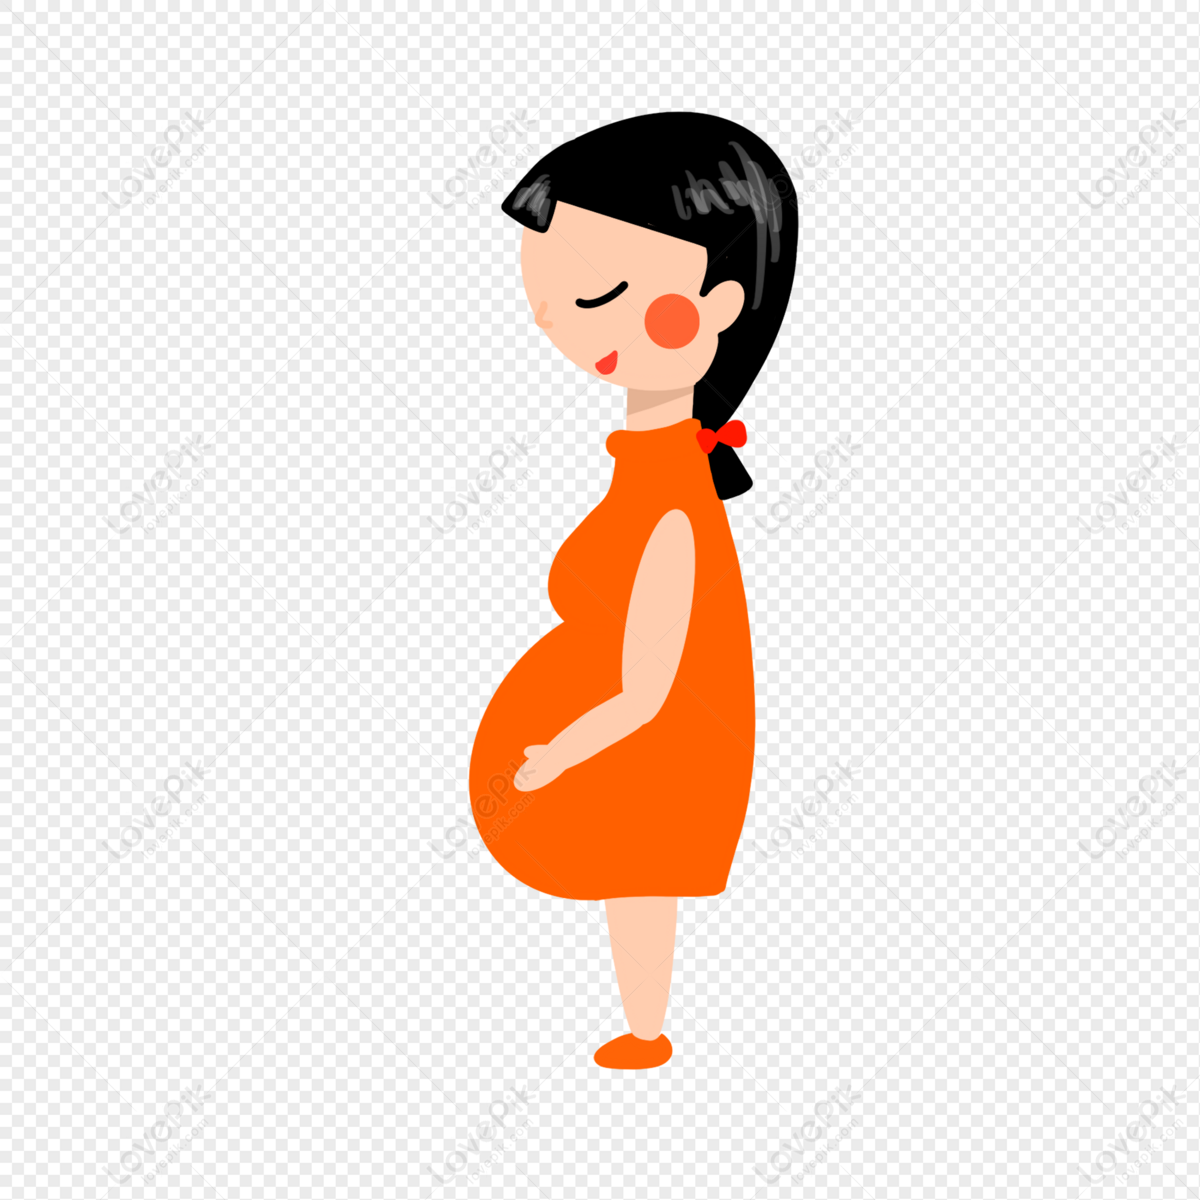 Happy Pregnant Woman PNG Image Free Download And Clipart Image For Free  Download - Lovepik | 401200891